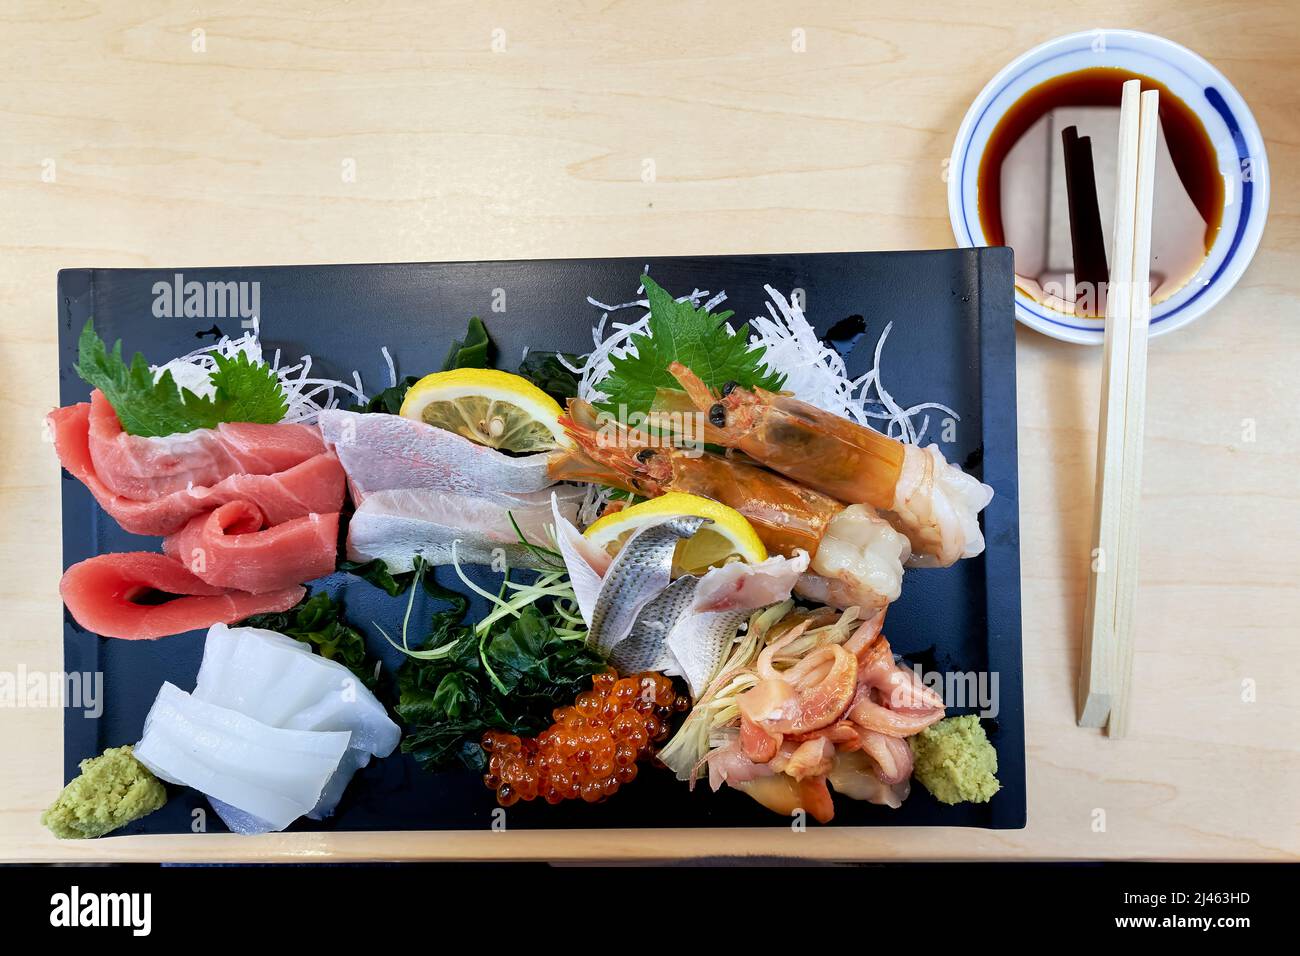 Japan. Tokyo. A plate of sashimi ready to be tasted Stock Photo